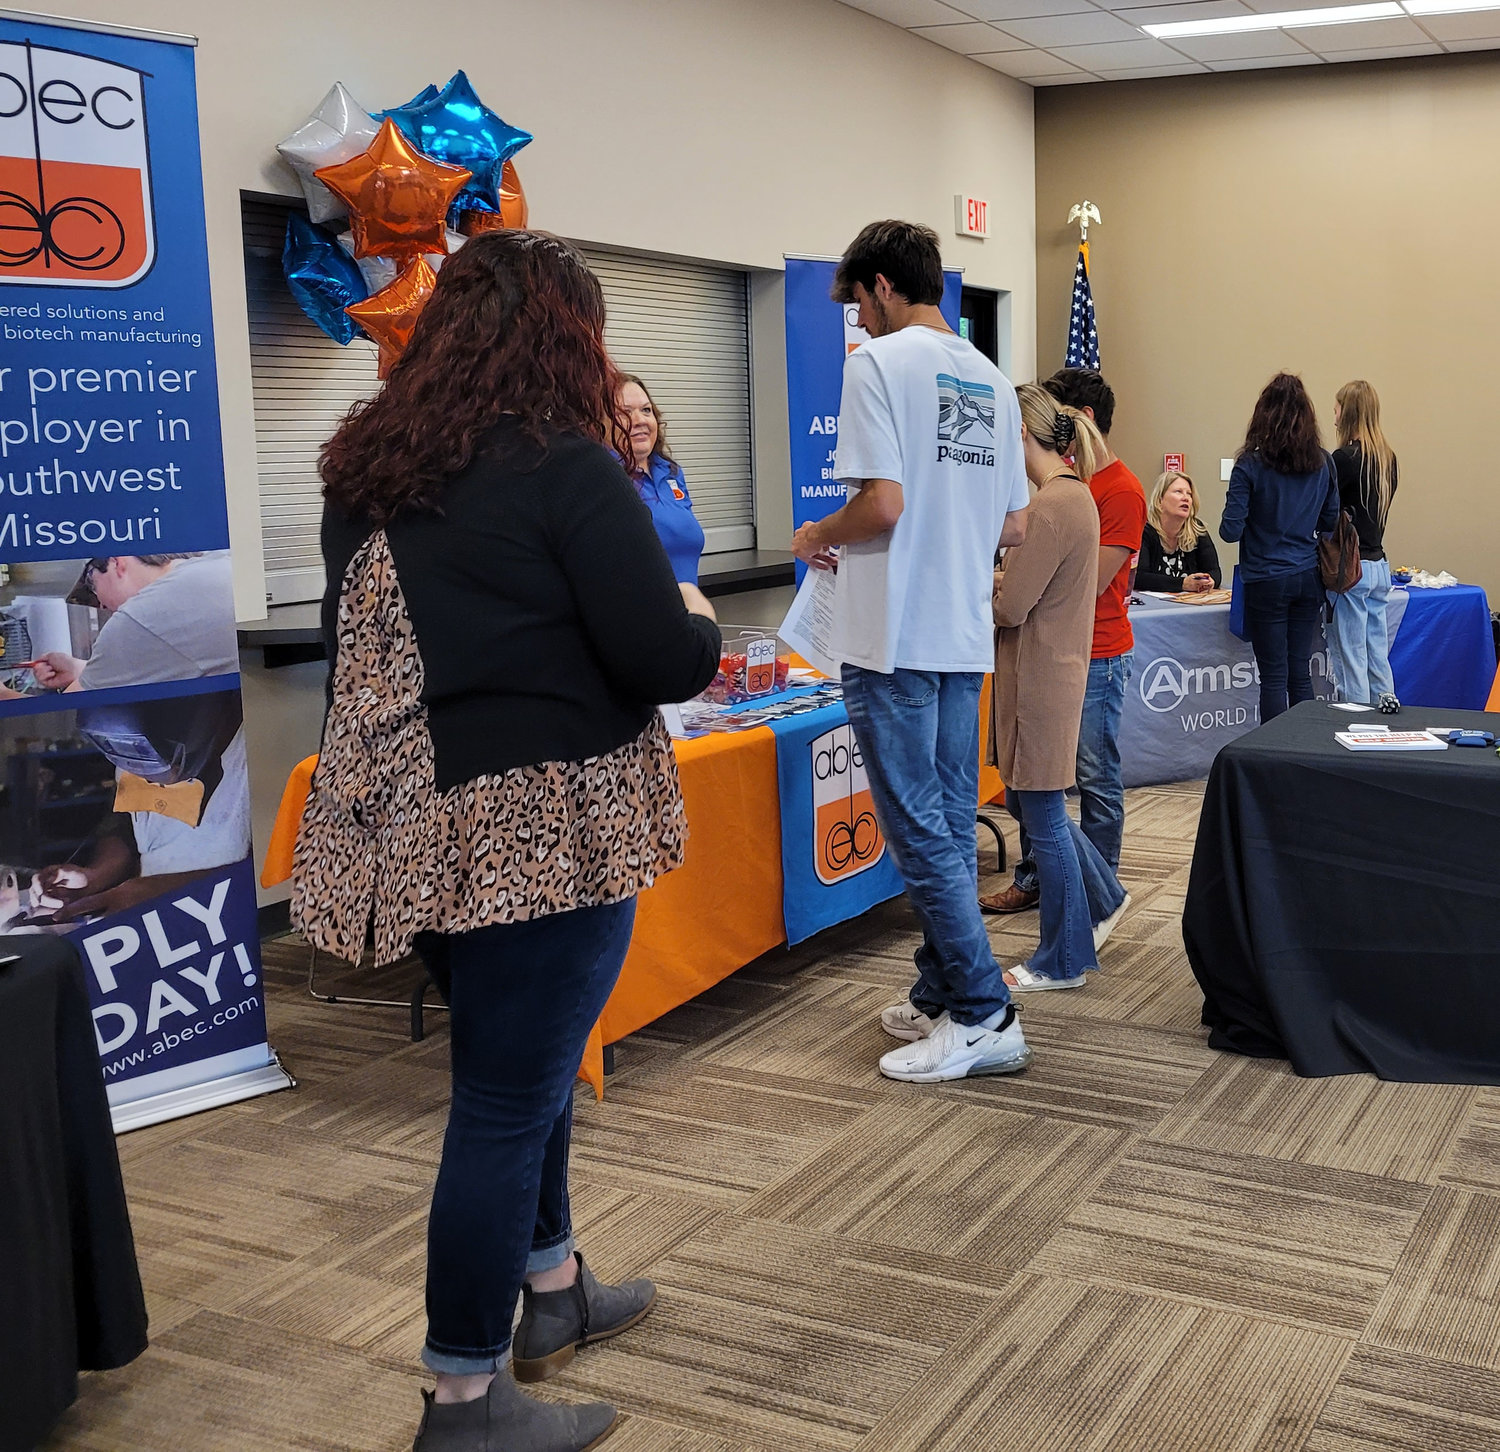 Opportunities abound! Local job hunters were able to explore new career opportunities in the local area.